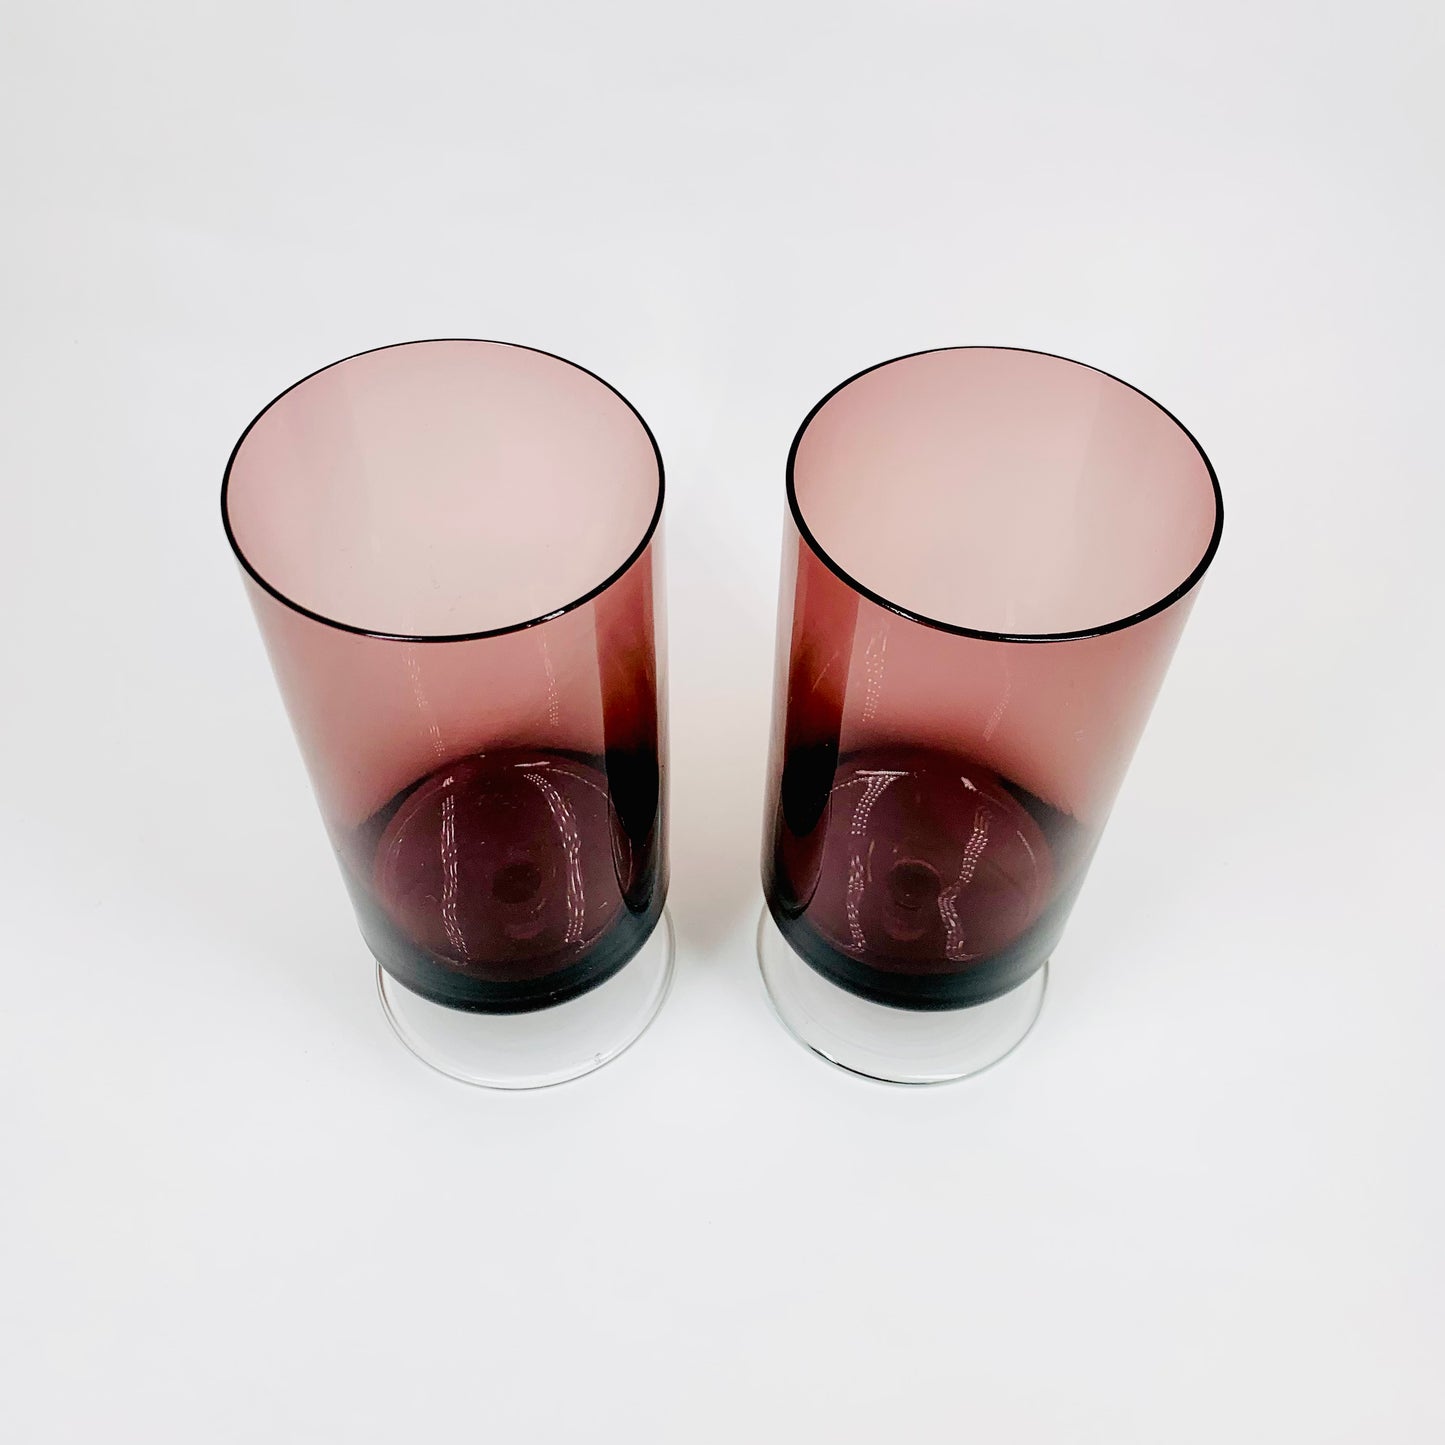 Extremely rare Midcentury amethyst footed highball/wine glasses